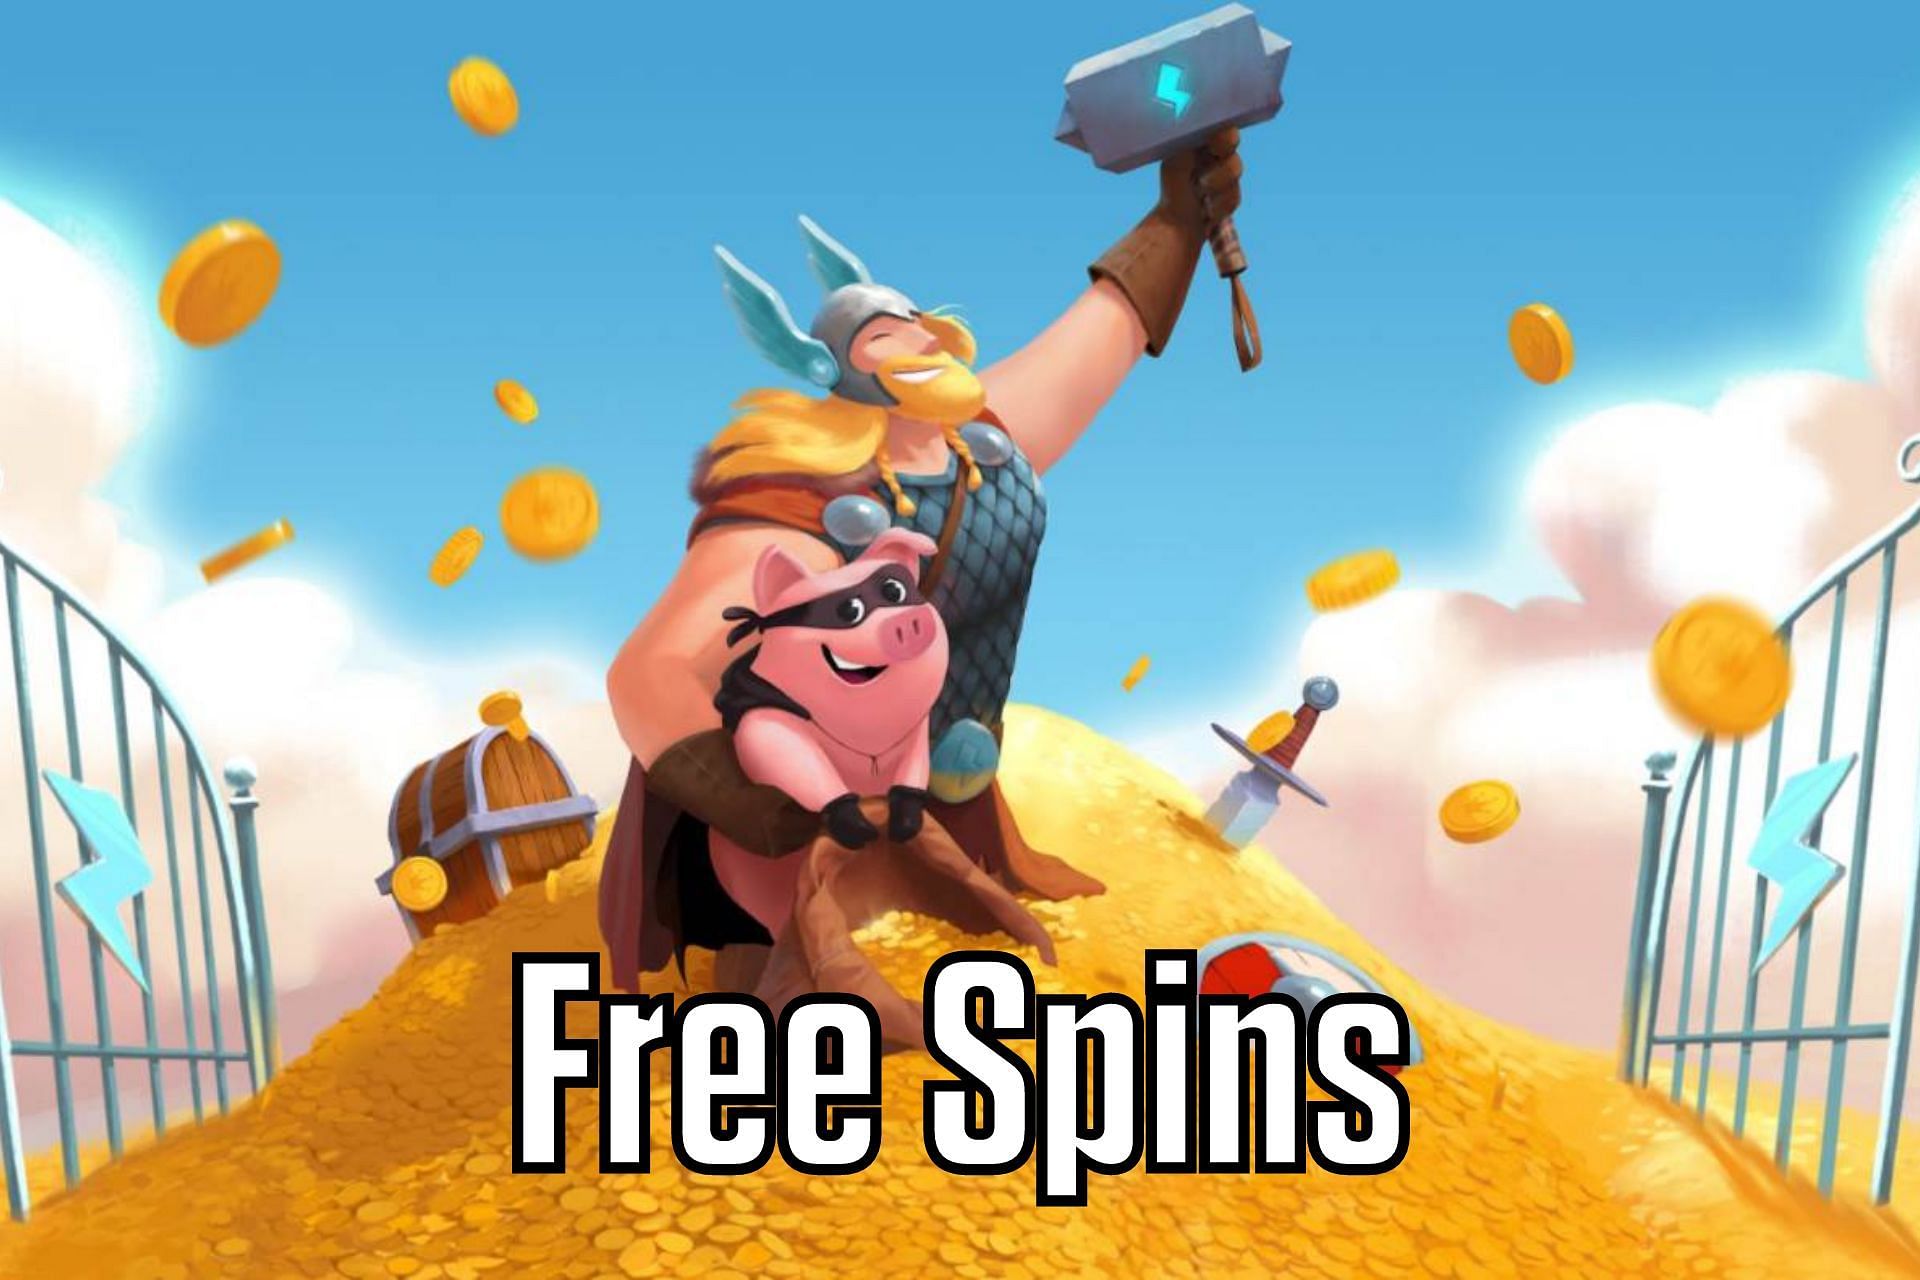 Get Free Spins by clicking the Twitter link (Image via Sportskeeda)